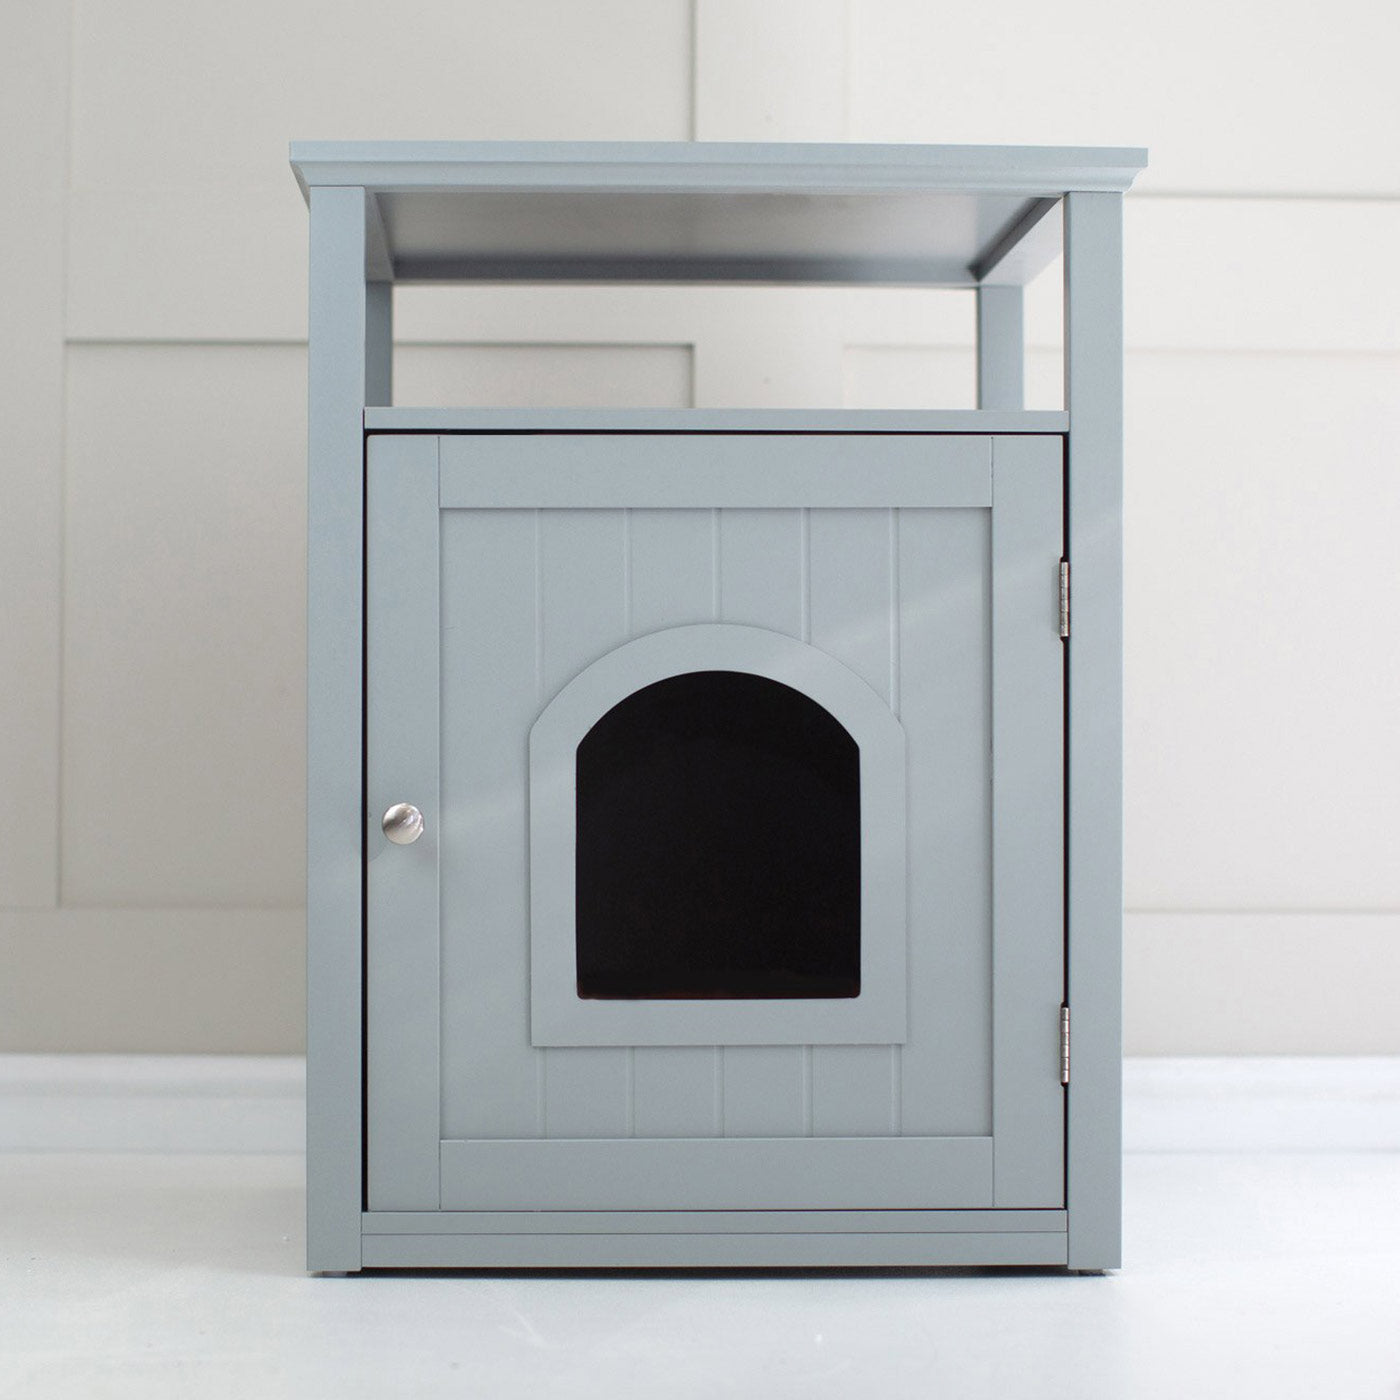 Discover The Perfect Multi-Functional Cat Washroom, Featuring Hinged Door for a Discreet Cat Loo. Suitable for All Cat Breeds! Made From Durable Wood to Ensure a Stylish Finish That Suits Any Home Decor! Includes a Complimentary Litter Tray. Available In Grey & White Now at Lords & Labradors    